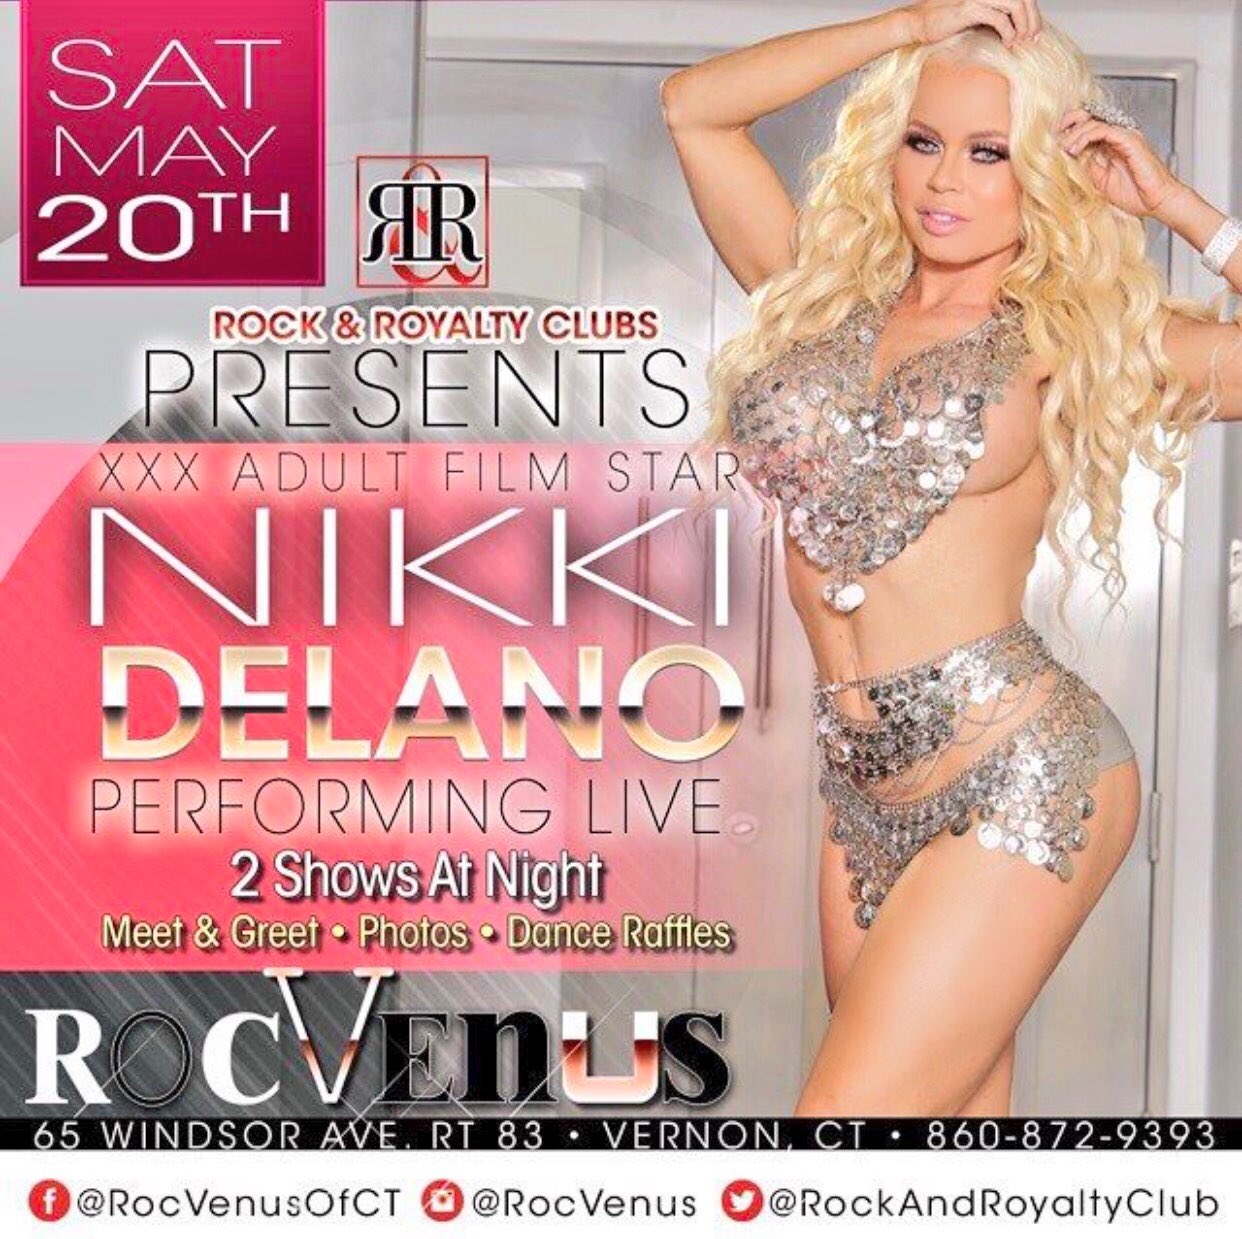 1 pic. Meet me live next weekend at @RockRoyaltyClub in Connecticut https://t.co/aChUfaZAUP